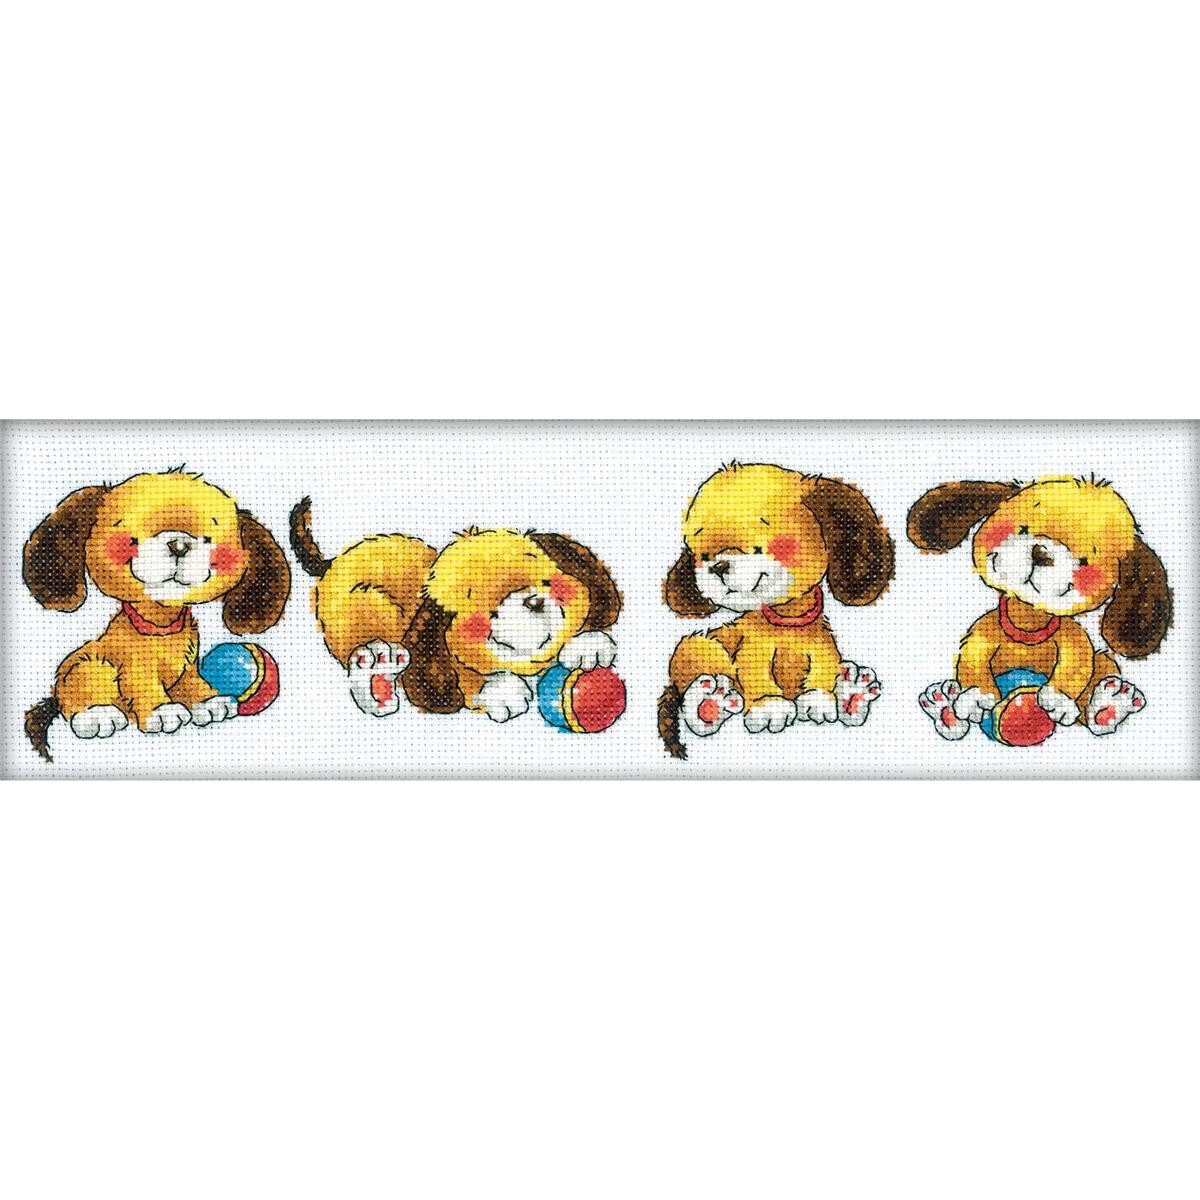 RTO counted Cross Stitch Kit "Four puppies"...